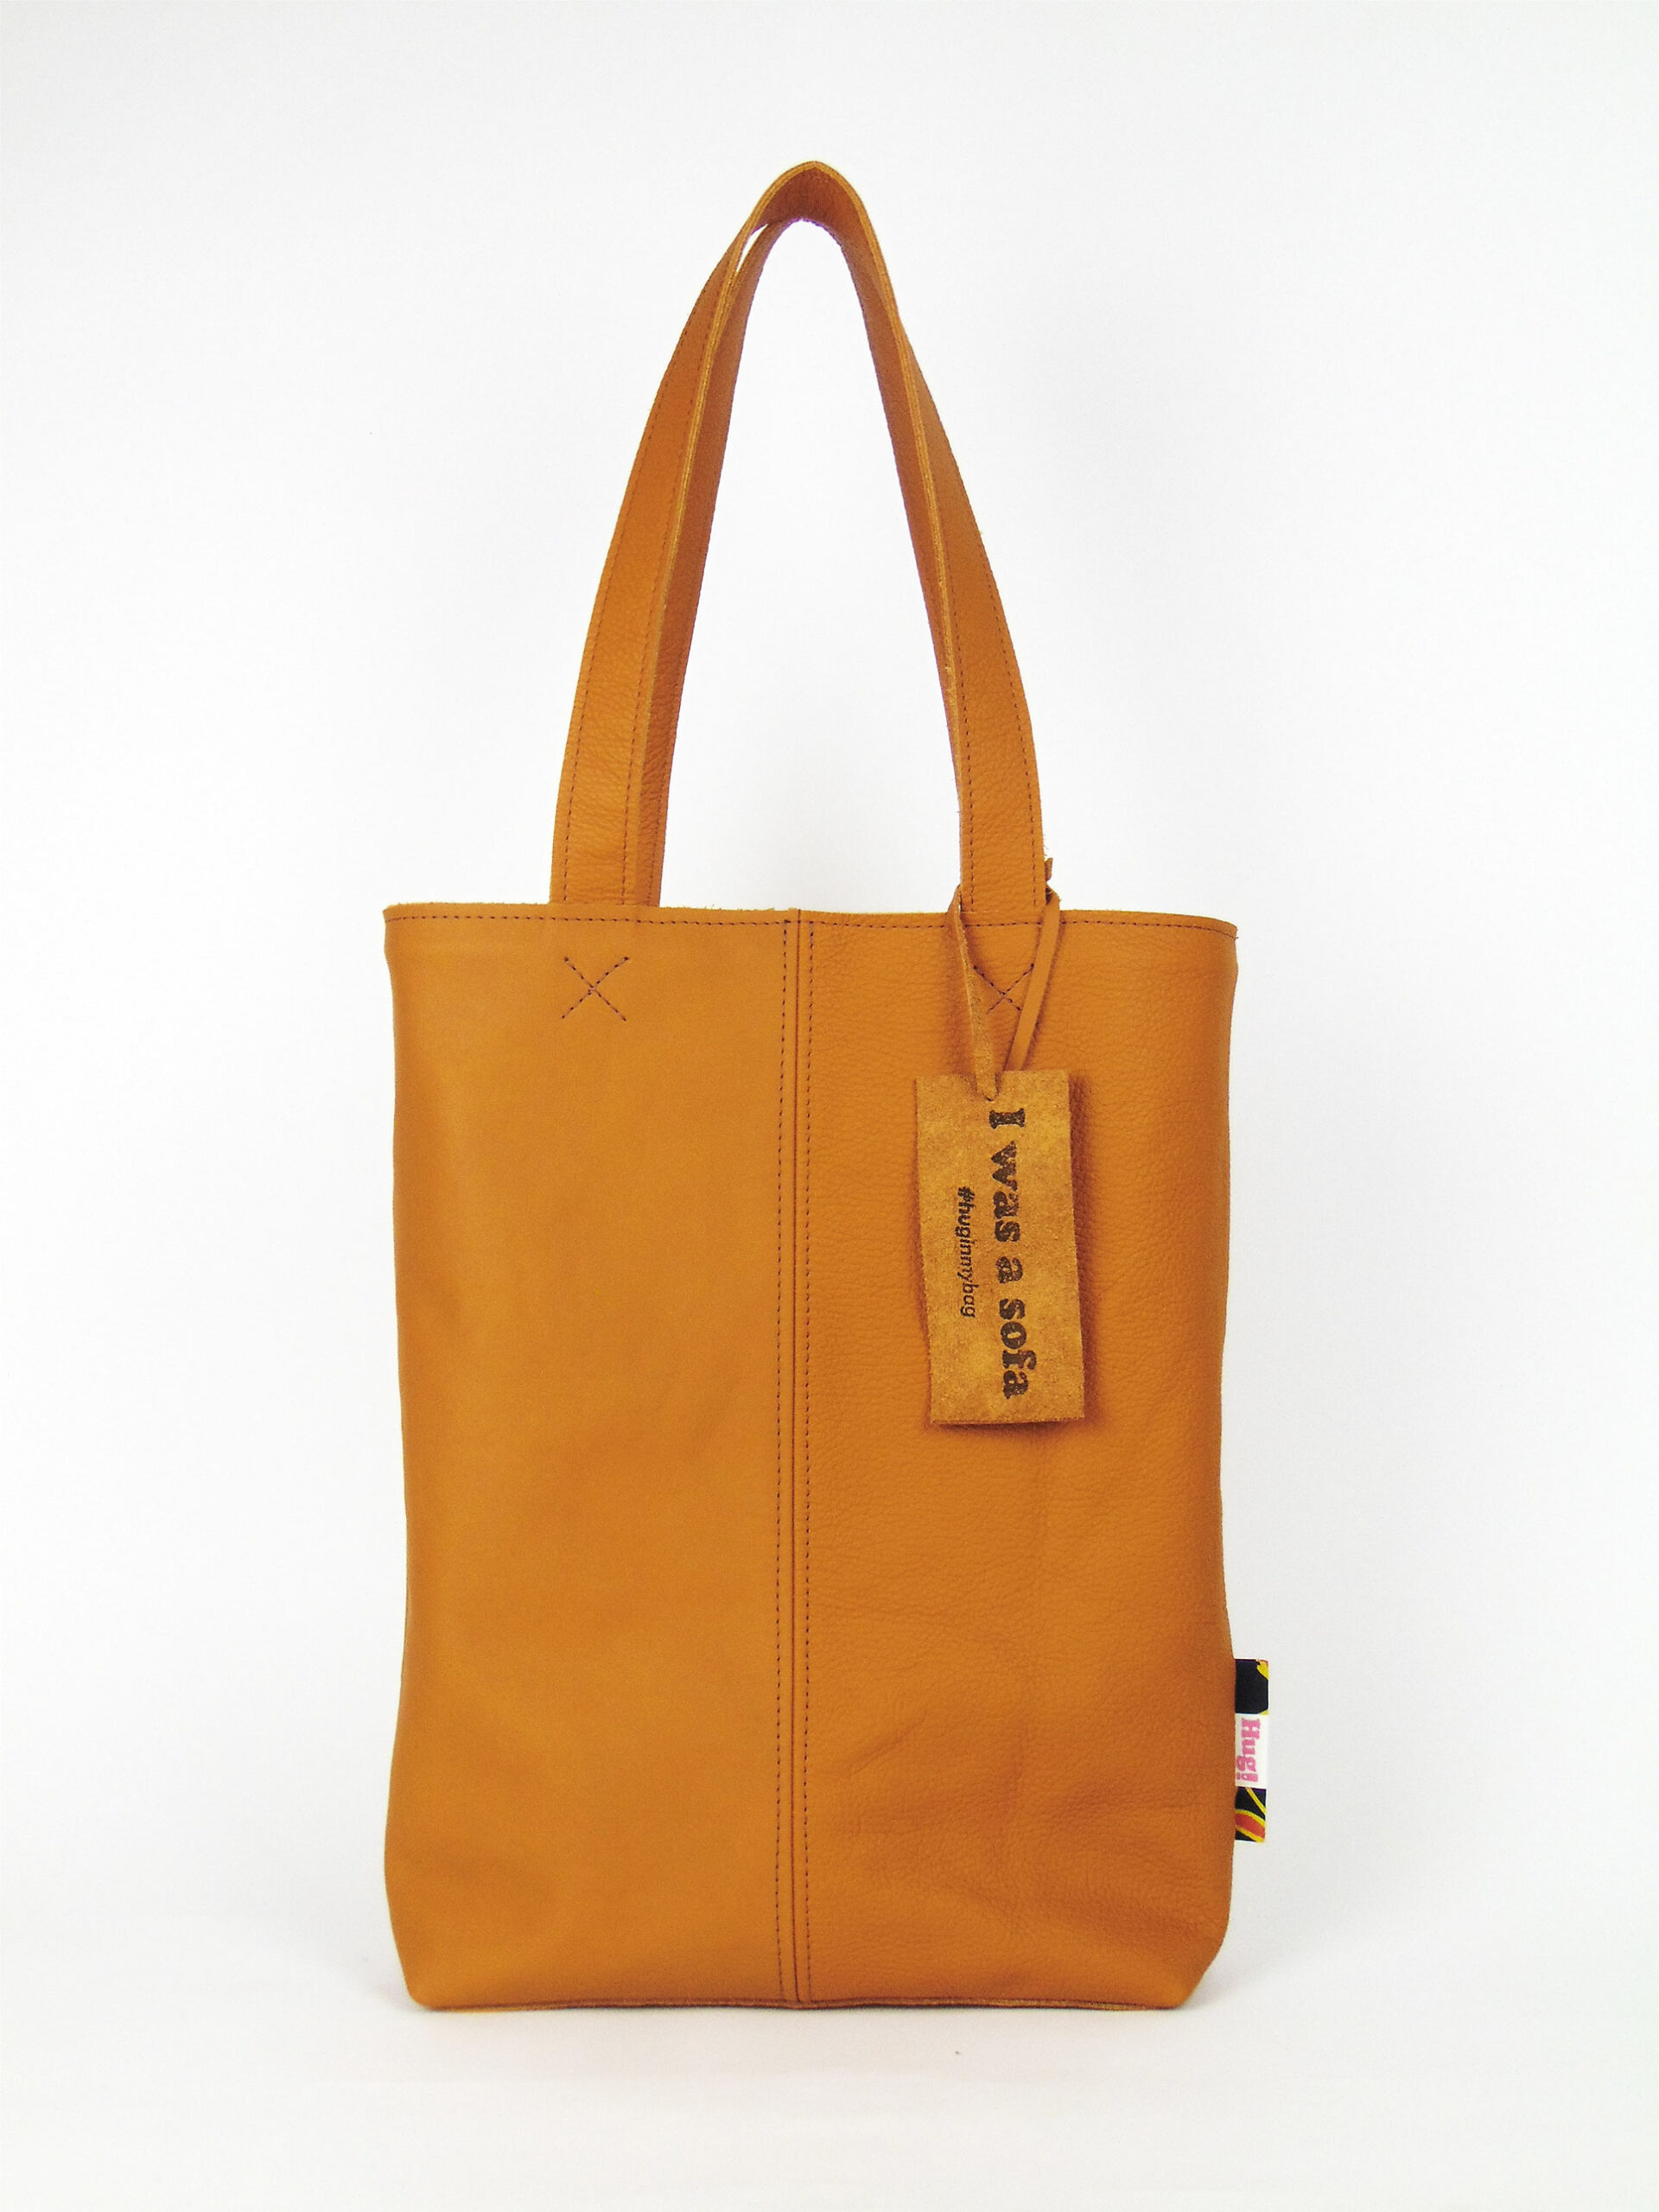 Product image of the shopper named Hello Sunshine. This shopper is made from recycled leather in a colour combination of different shades of yellow.